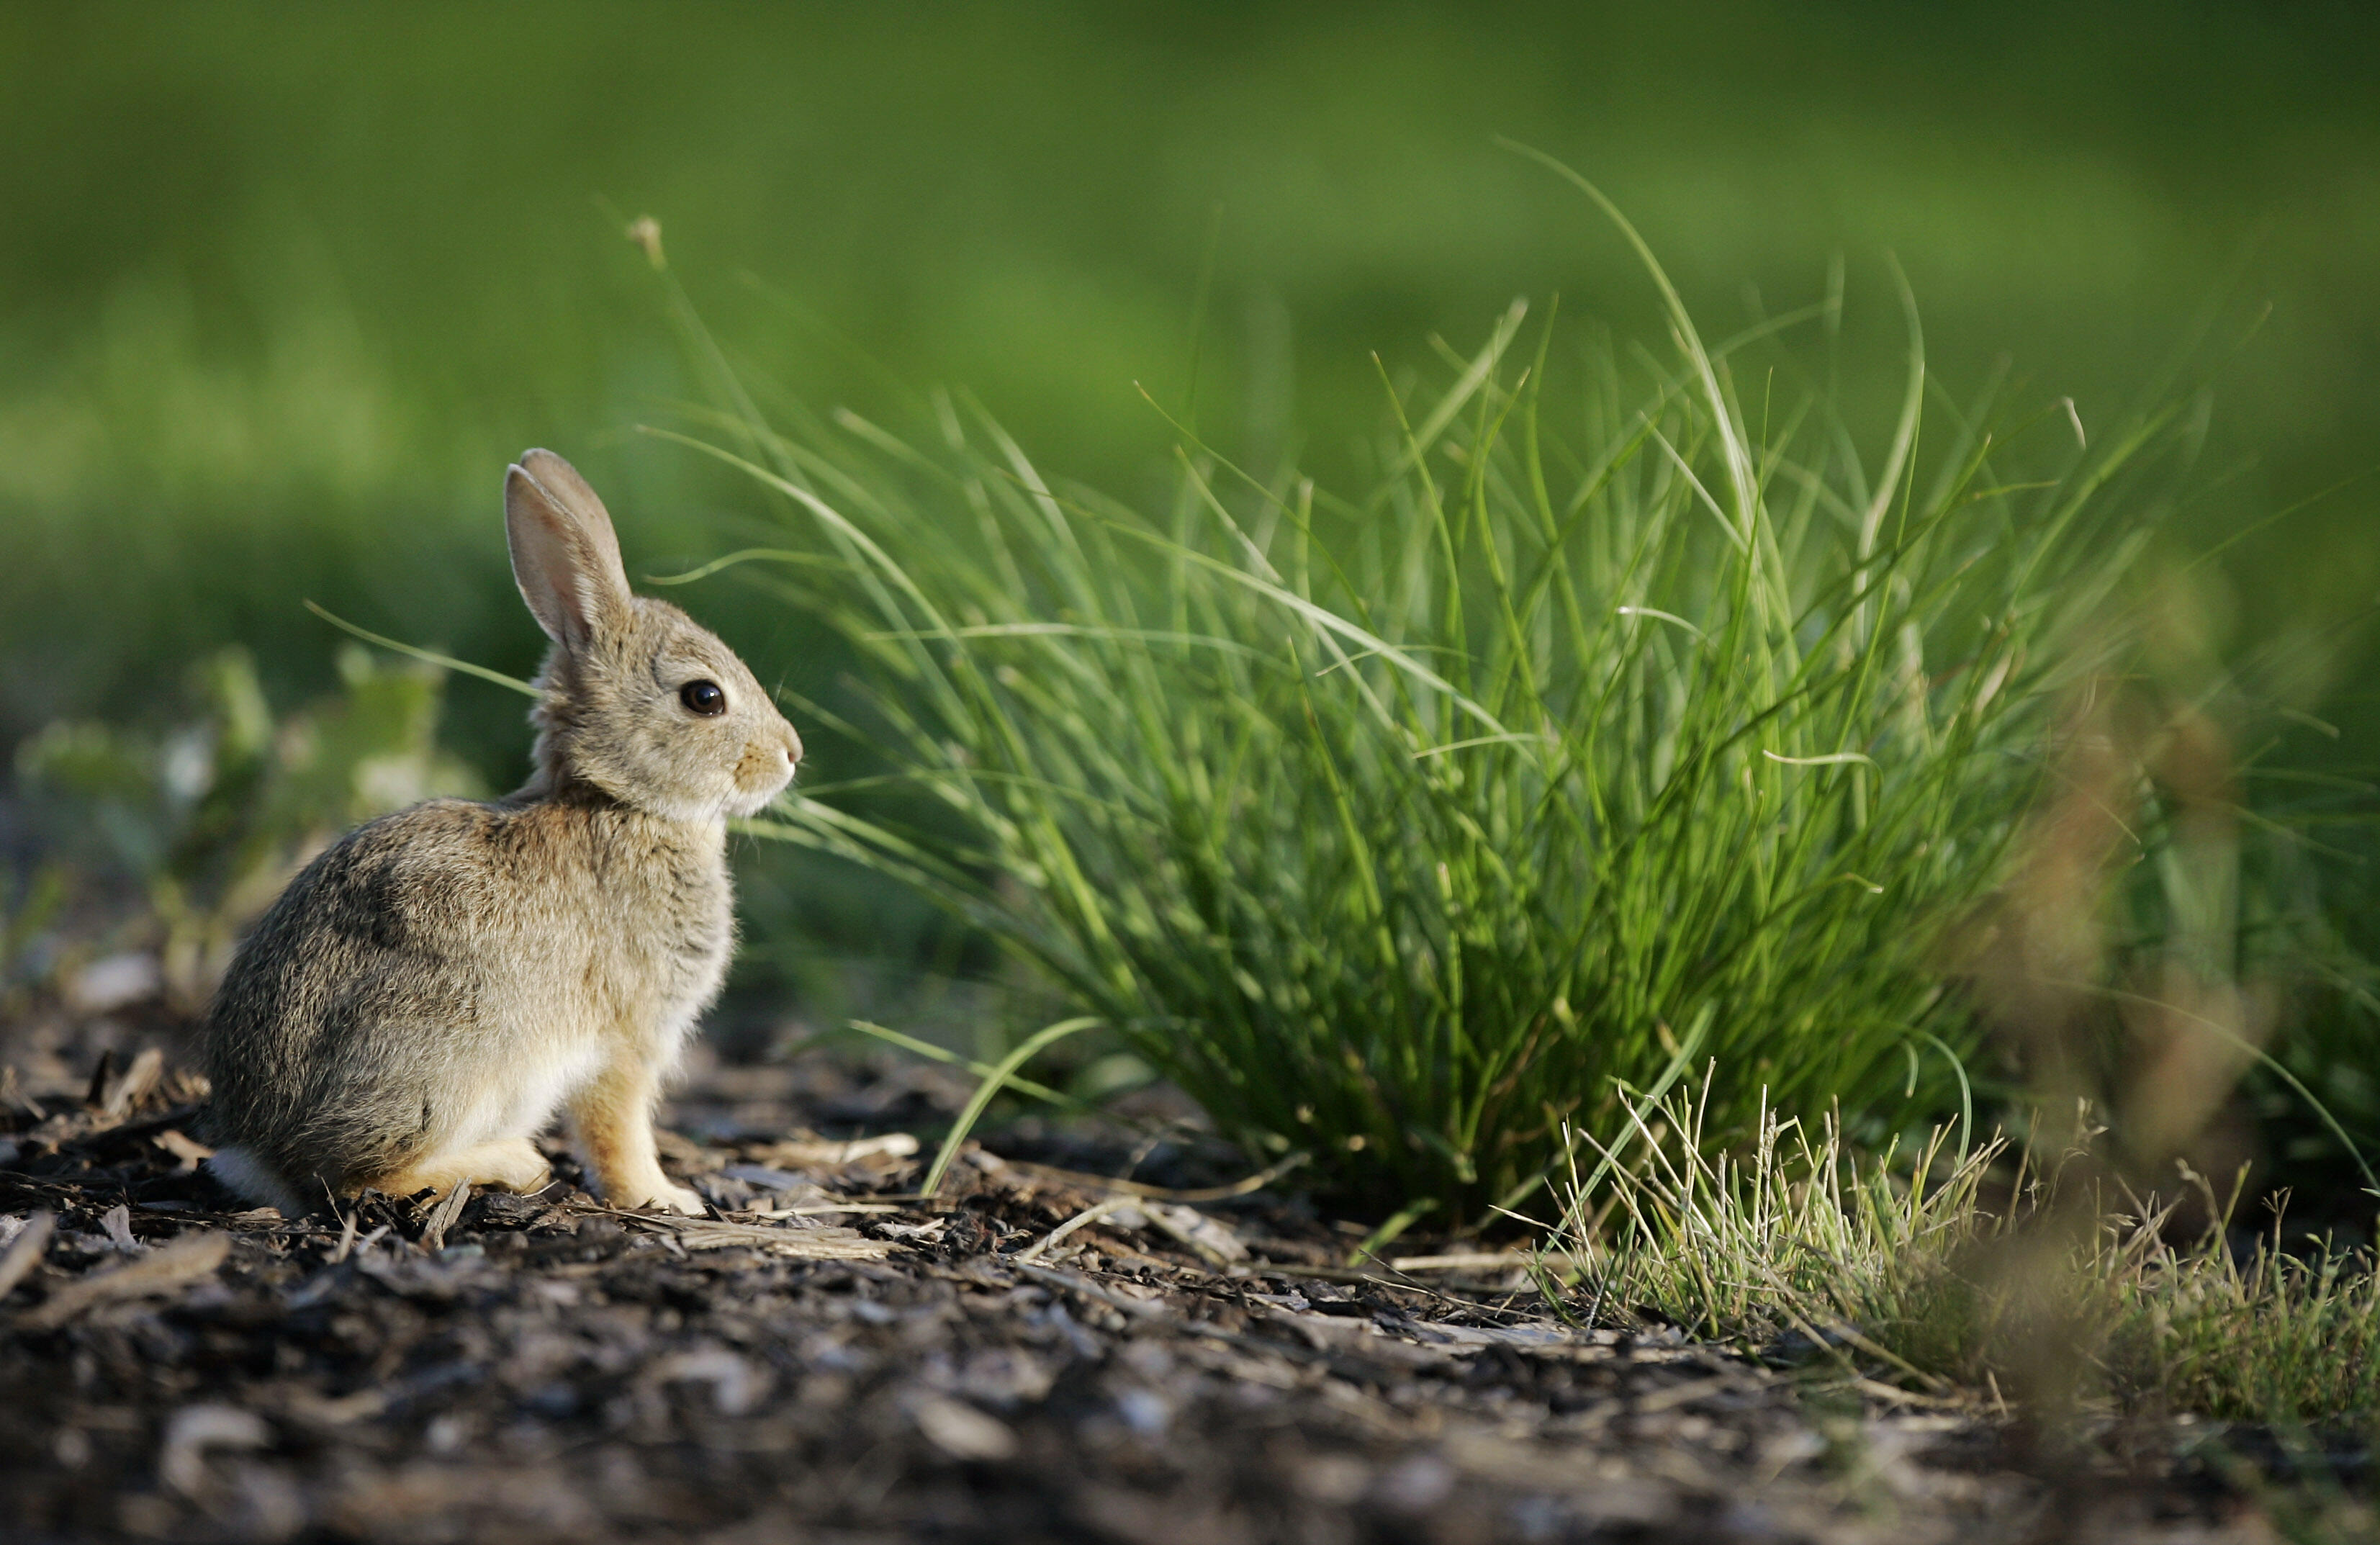 CASTLE ROCK, CO - AUGUST 7:  A cottontail rabbit nibbles on some grass near the 17th tee during the International at Castle Pines Golf Club on August 7, 2005 near Castle Rock, Colorado.  (Photo by Brian Bahr/Getty Images)